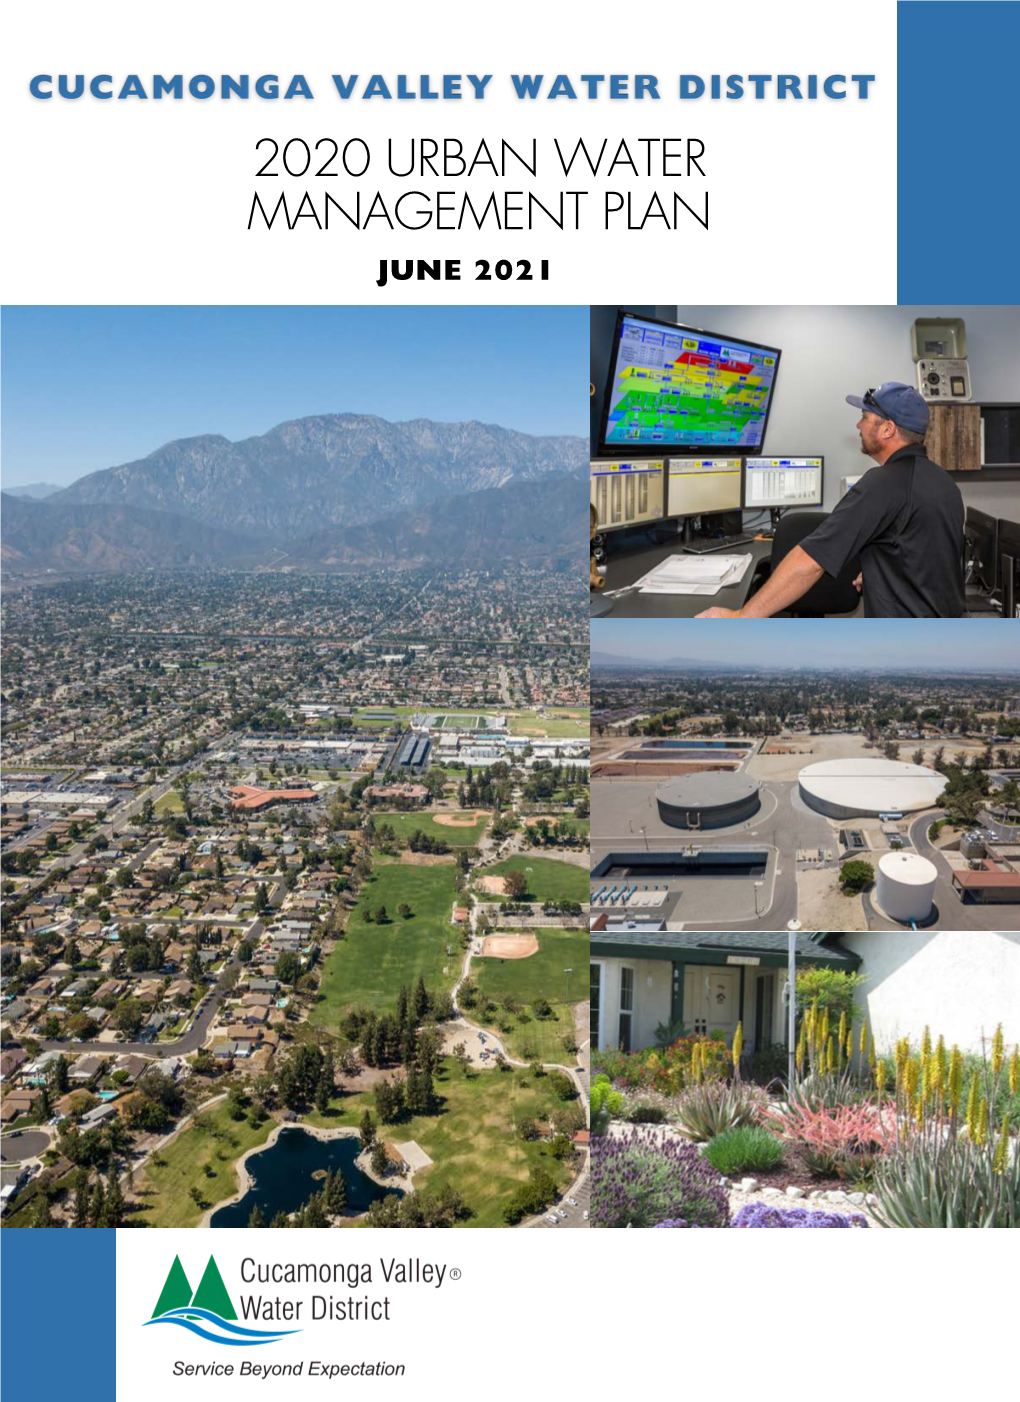 Cucamonga Valley Water District 2020 UWMP